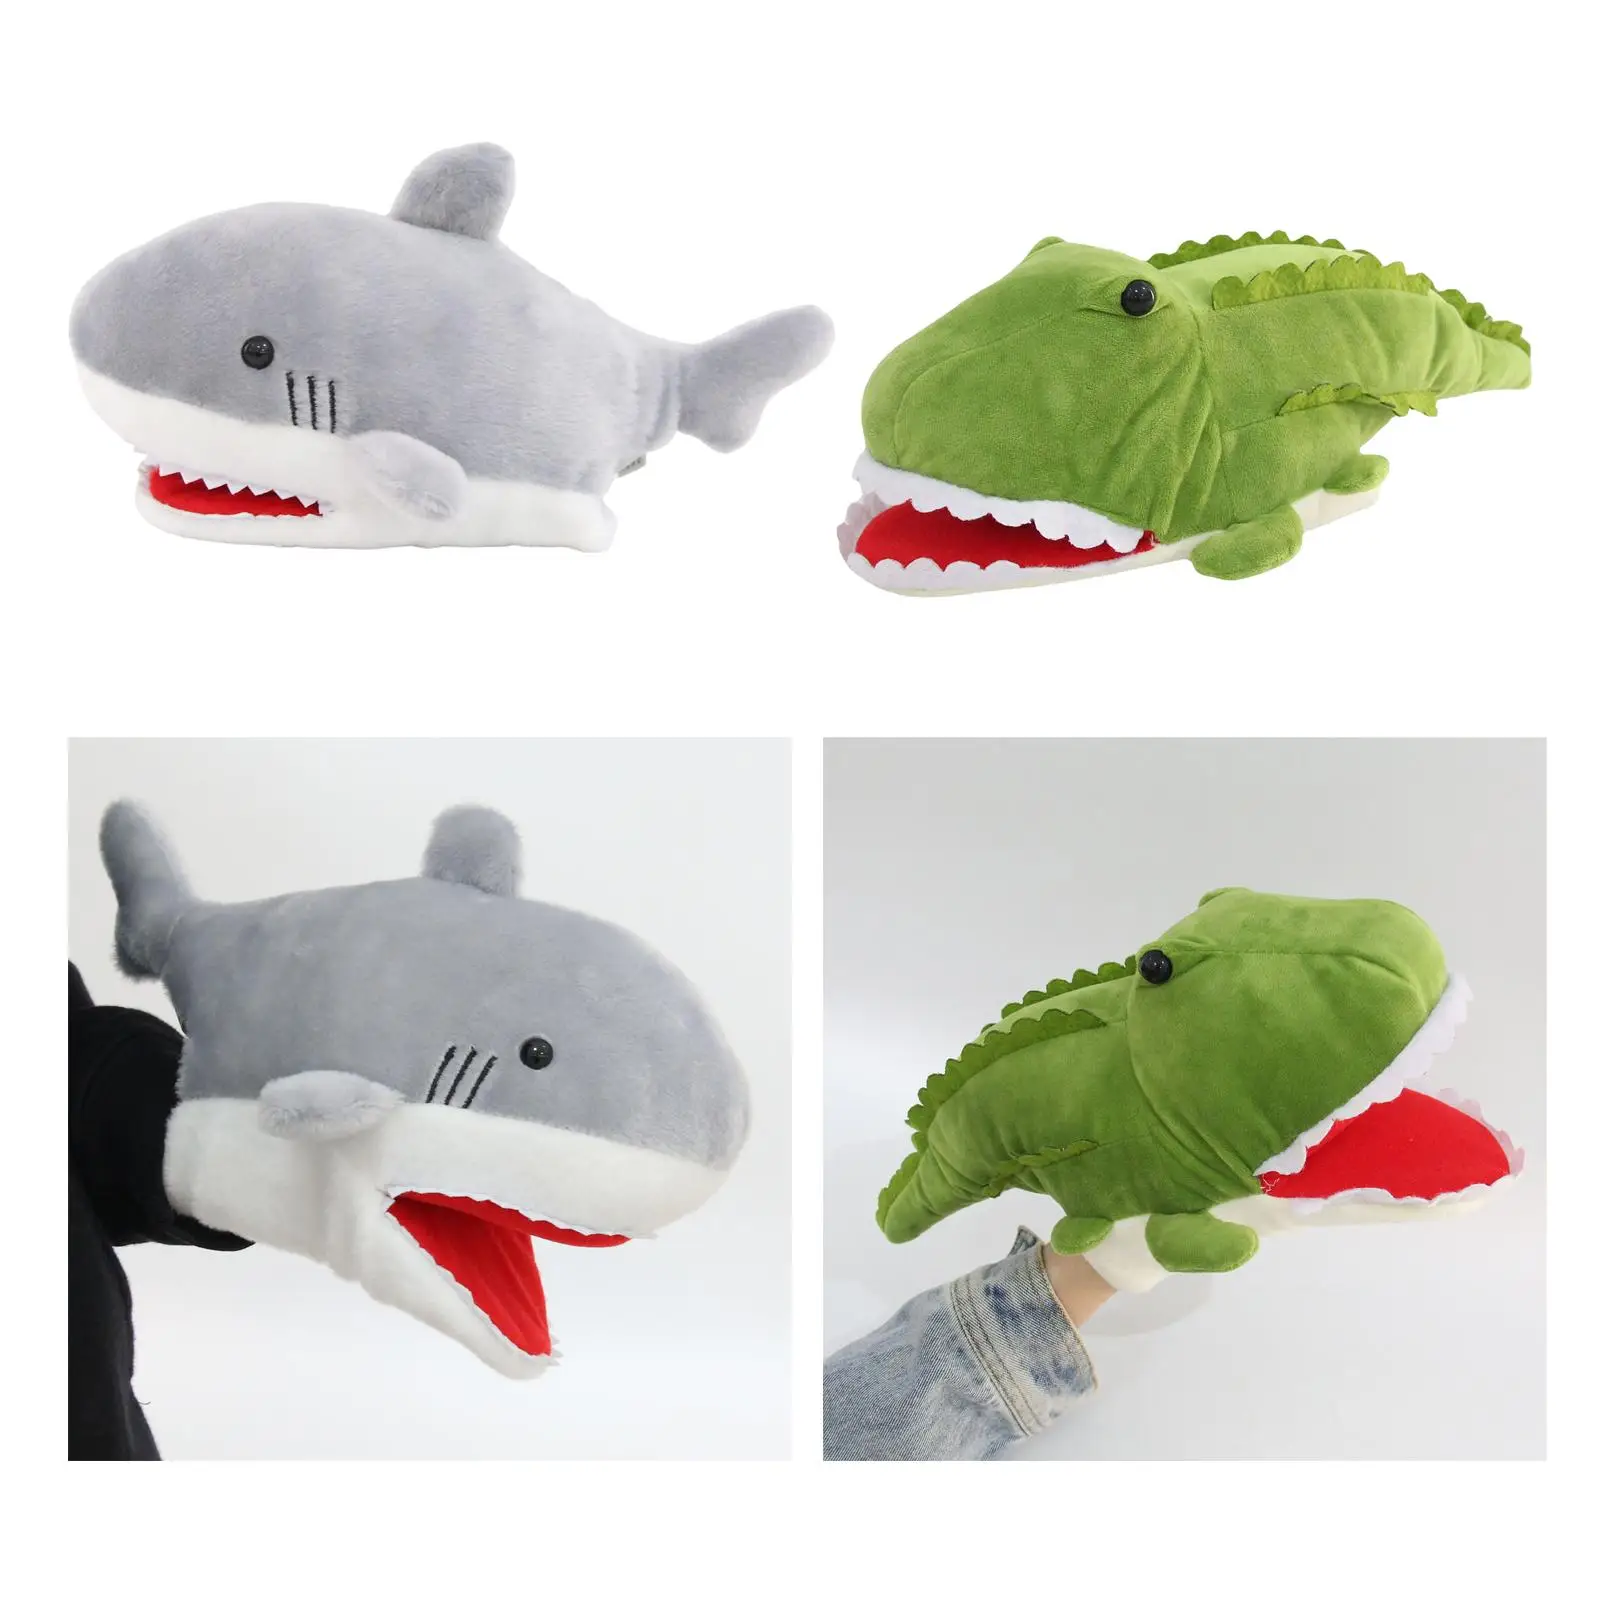 Animal Hand Puppets Kids Toys Gift Model Figure Toy Stuffed Animal Toy for Teaching Imaginative